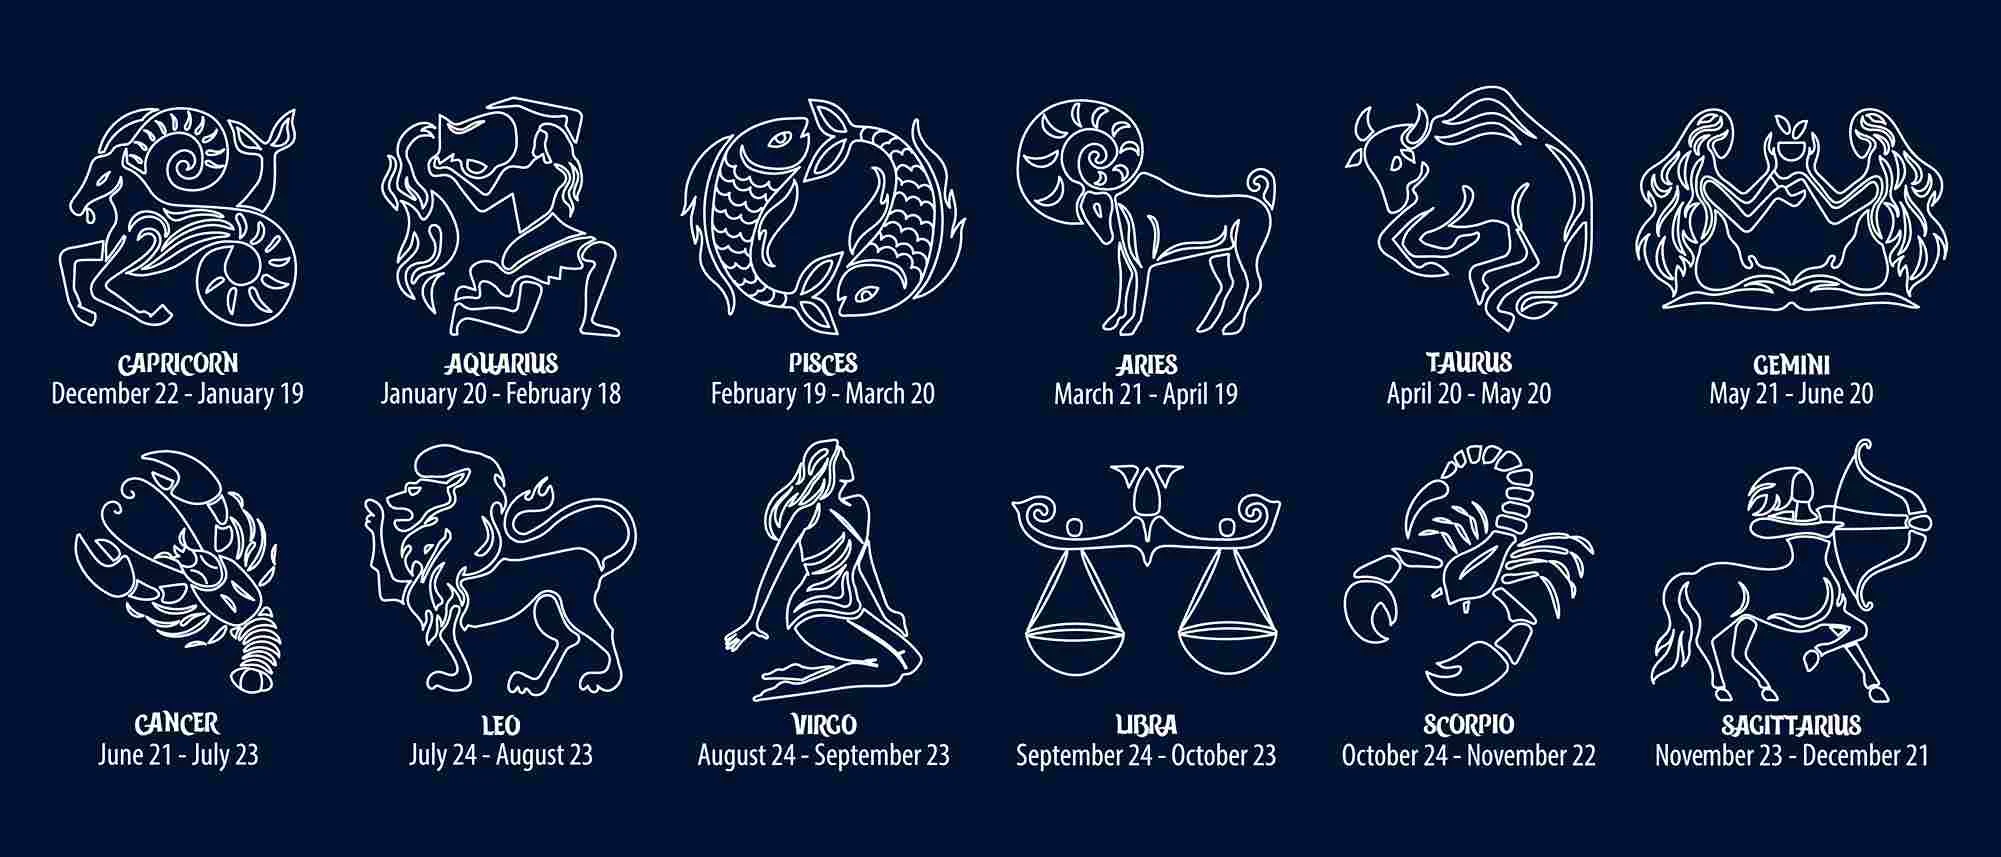 12 zodiac signs: Their strengths, weaknesses, and personalities